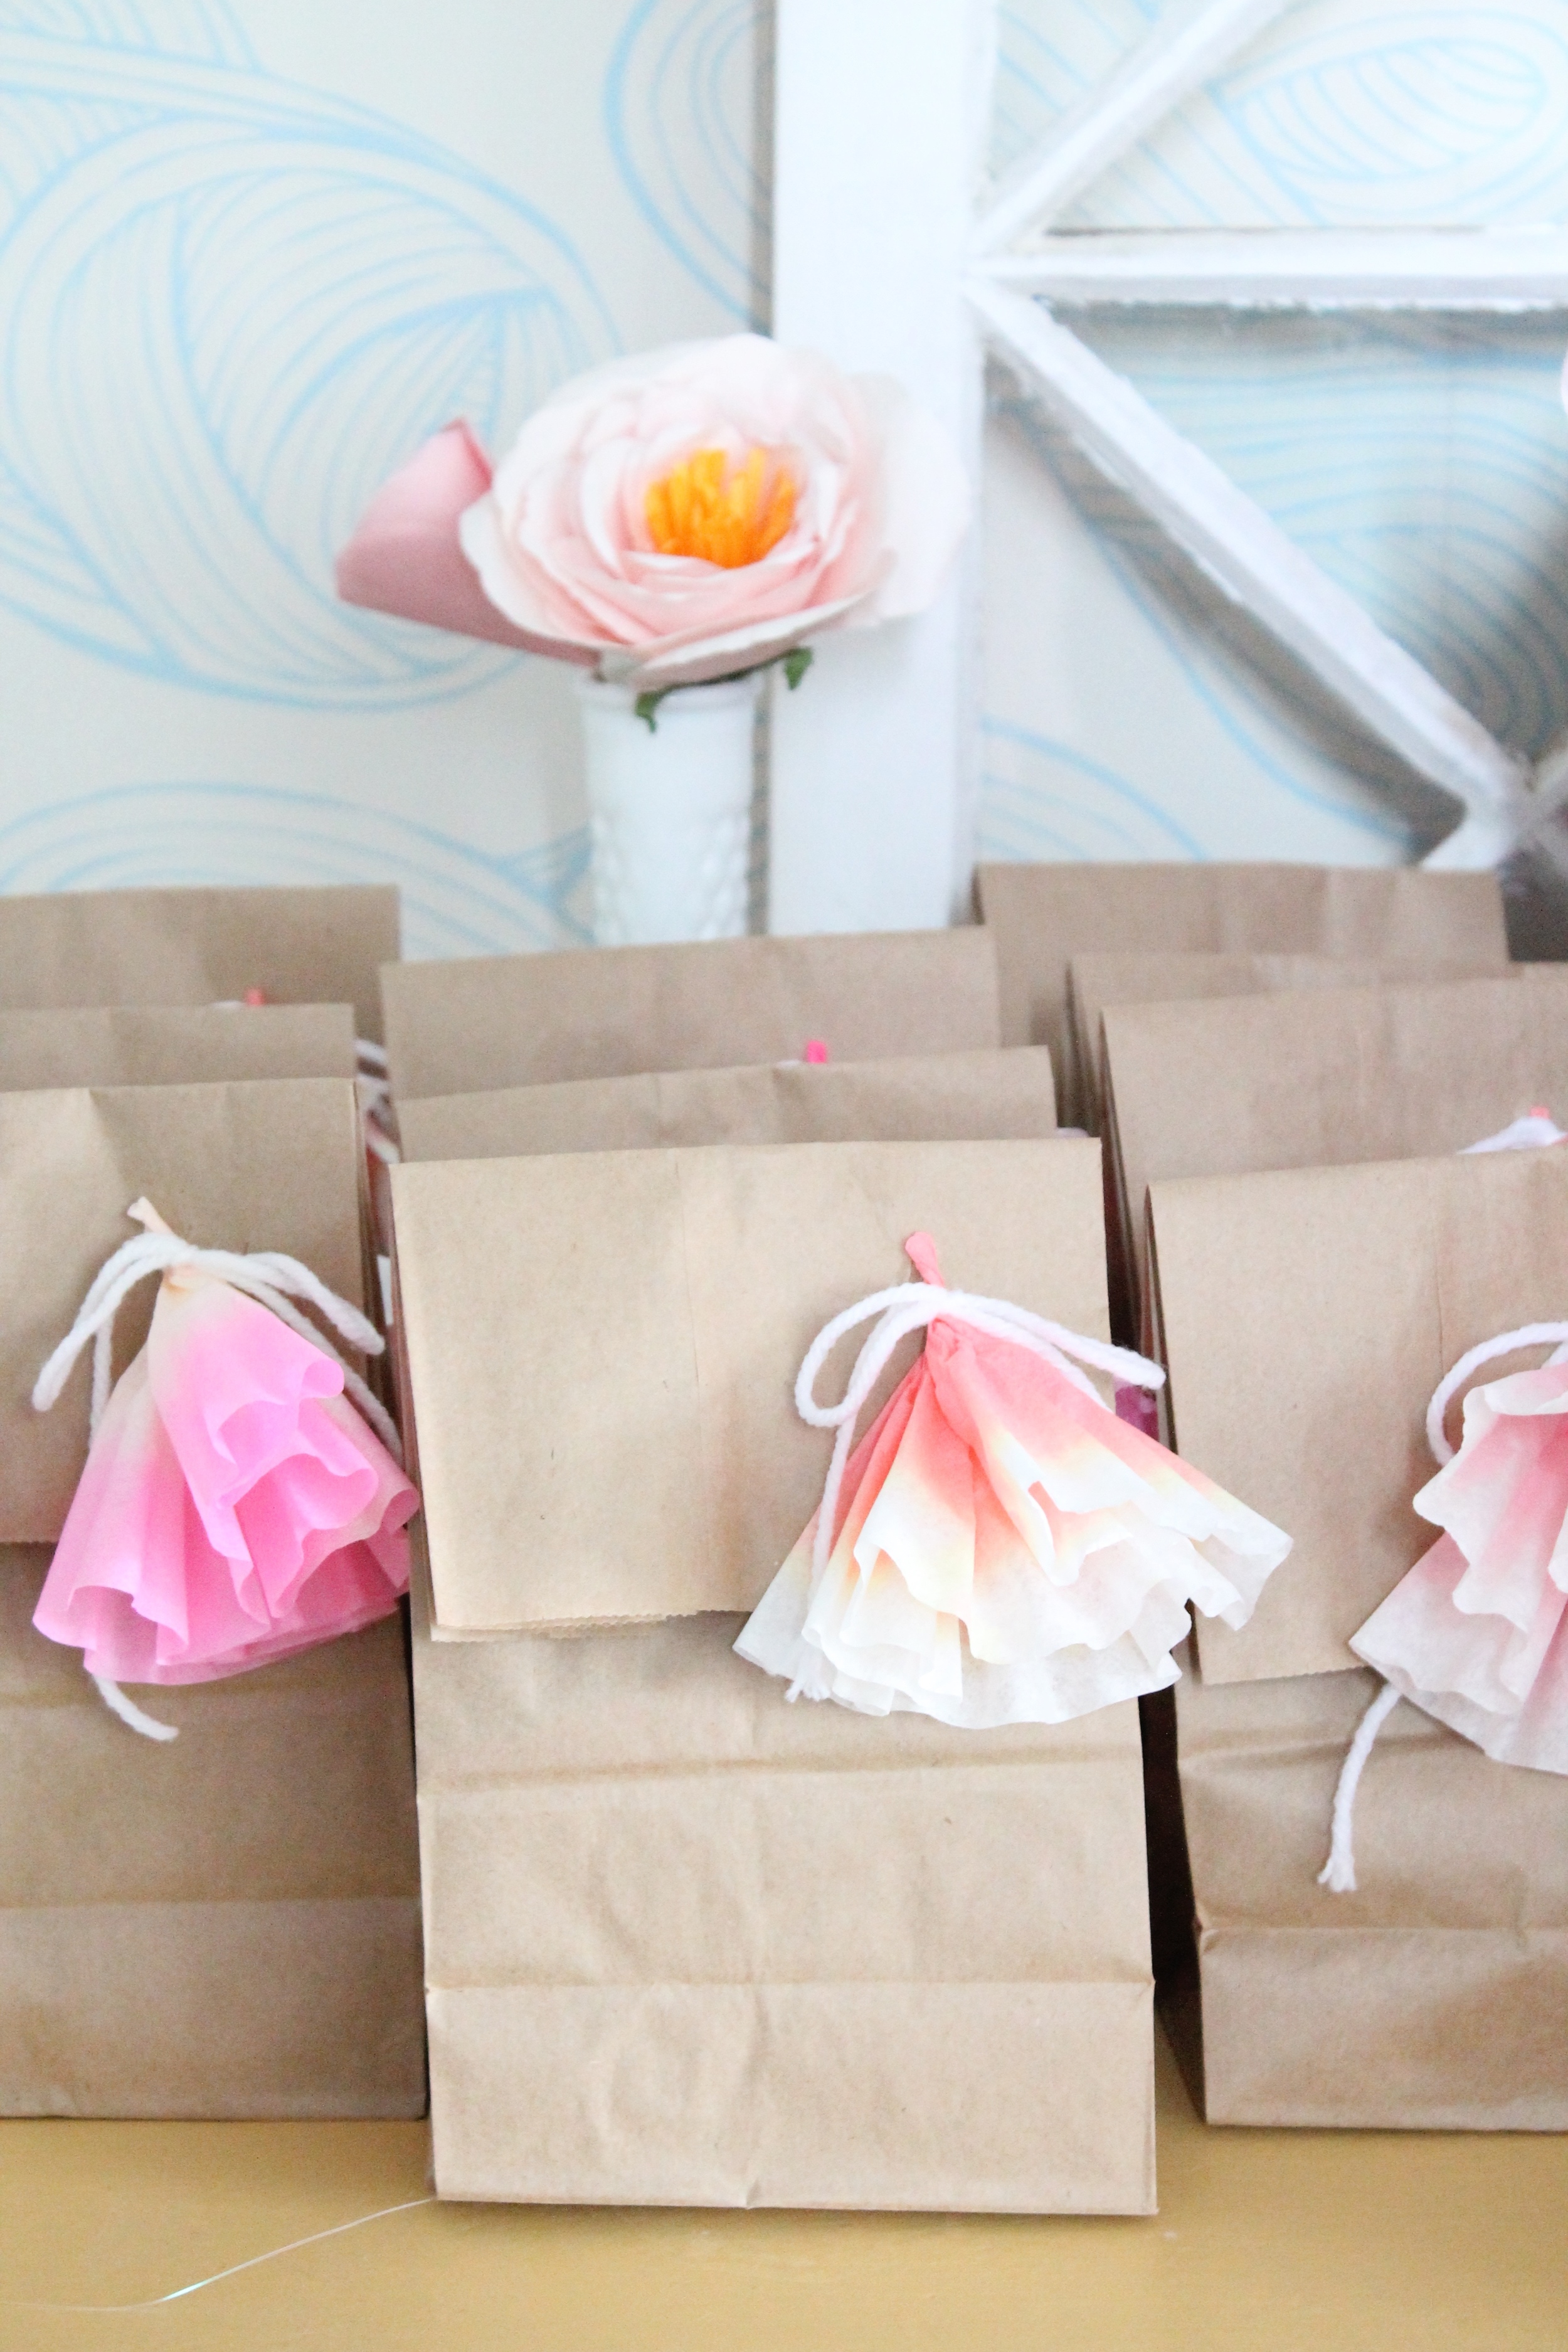 Adorable goodie bag idea for a garden tea party. Made with brown lunch sacks and coffee filter flowers.